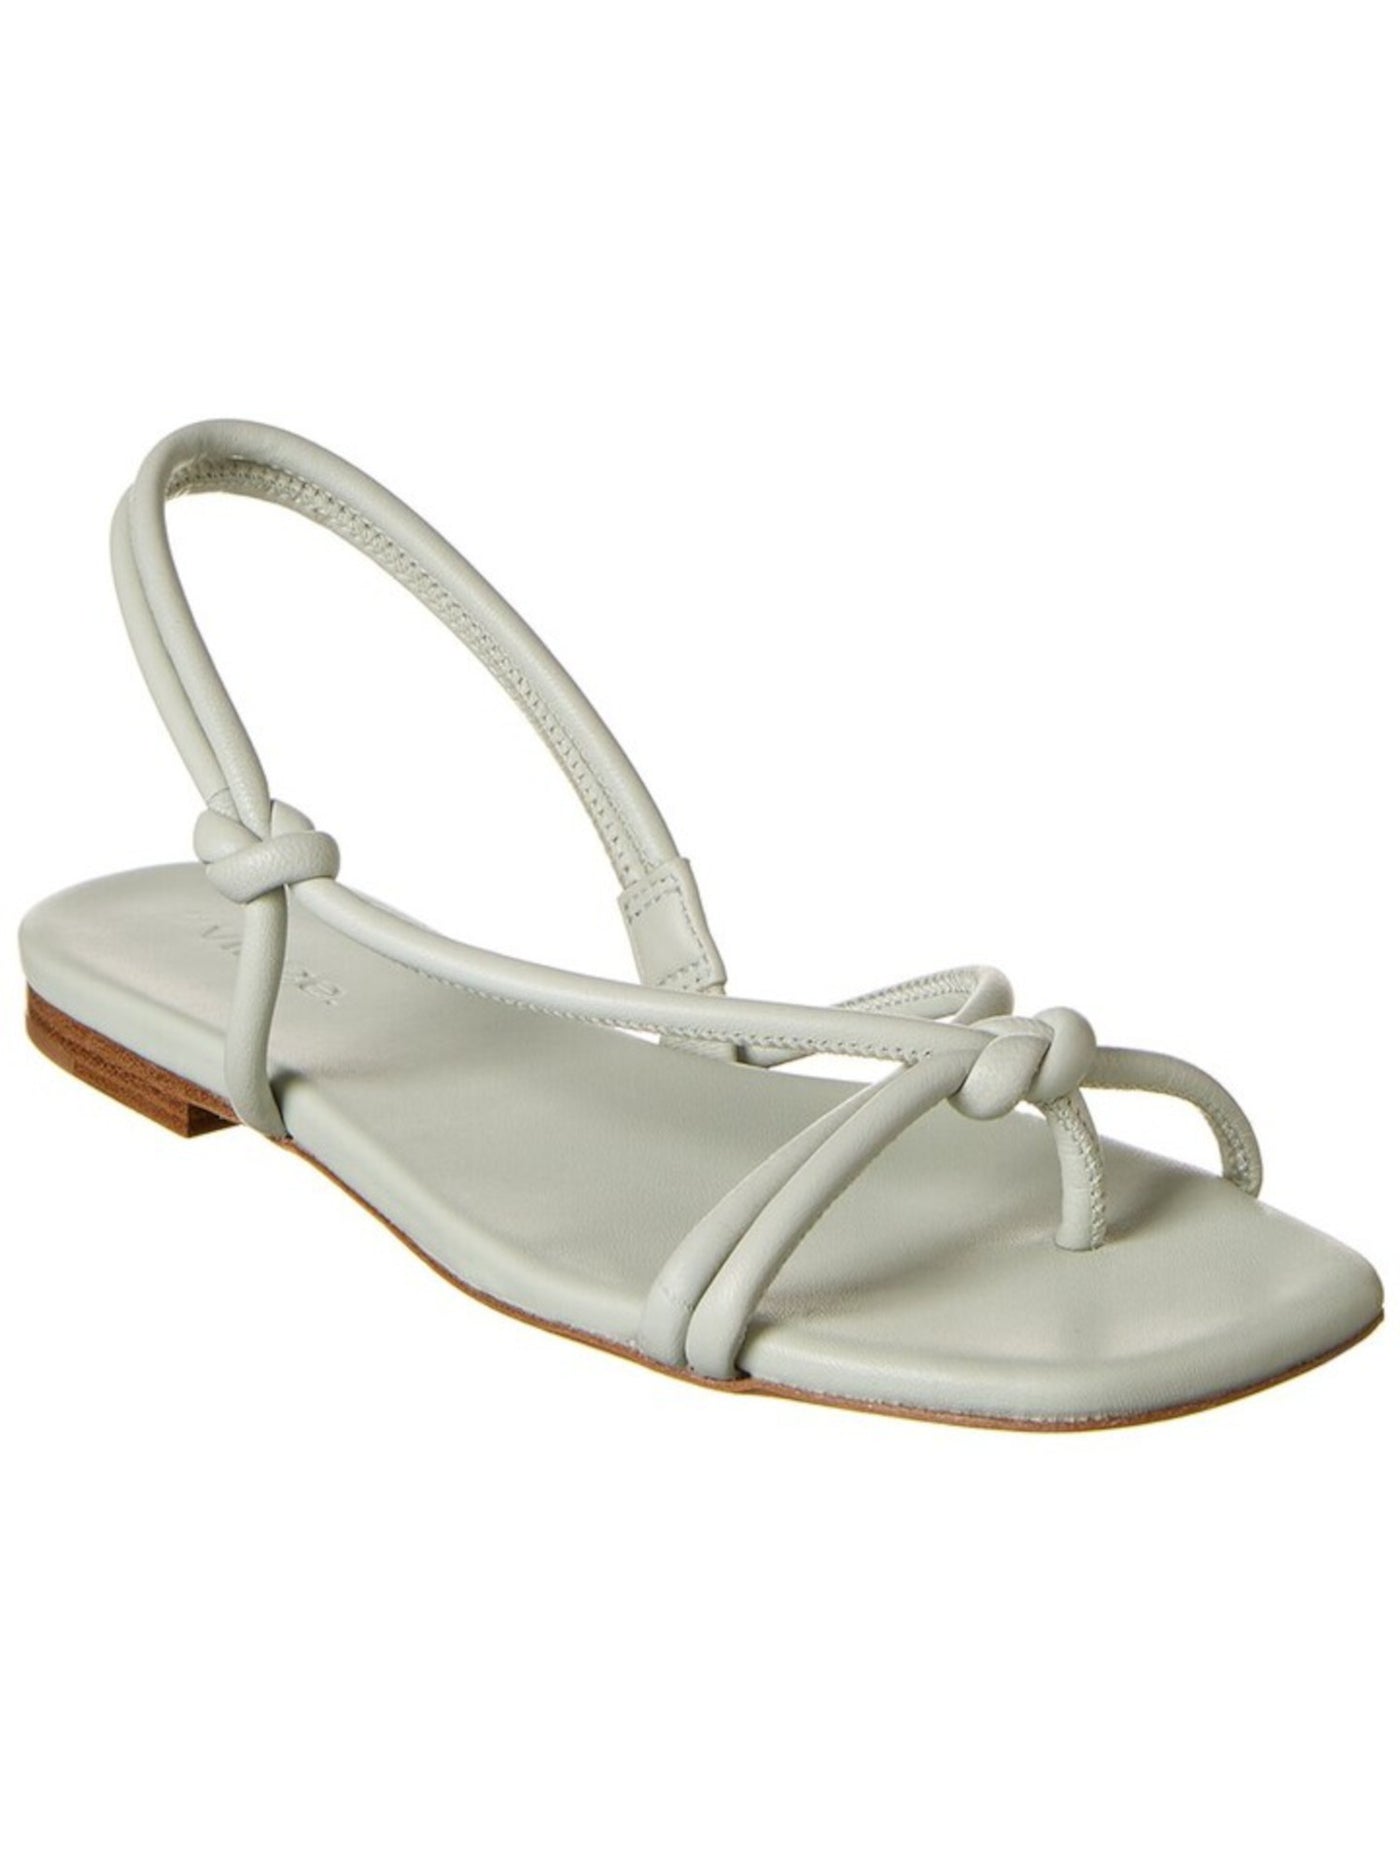 VINCE. Womens White Knotted Straps Cushioned Ankle Strap Doyle Square Toe Block Heel Slip On Leather Sandals Shoes 11 M